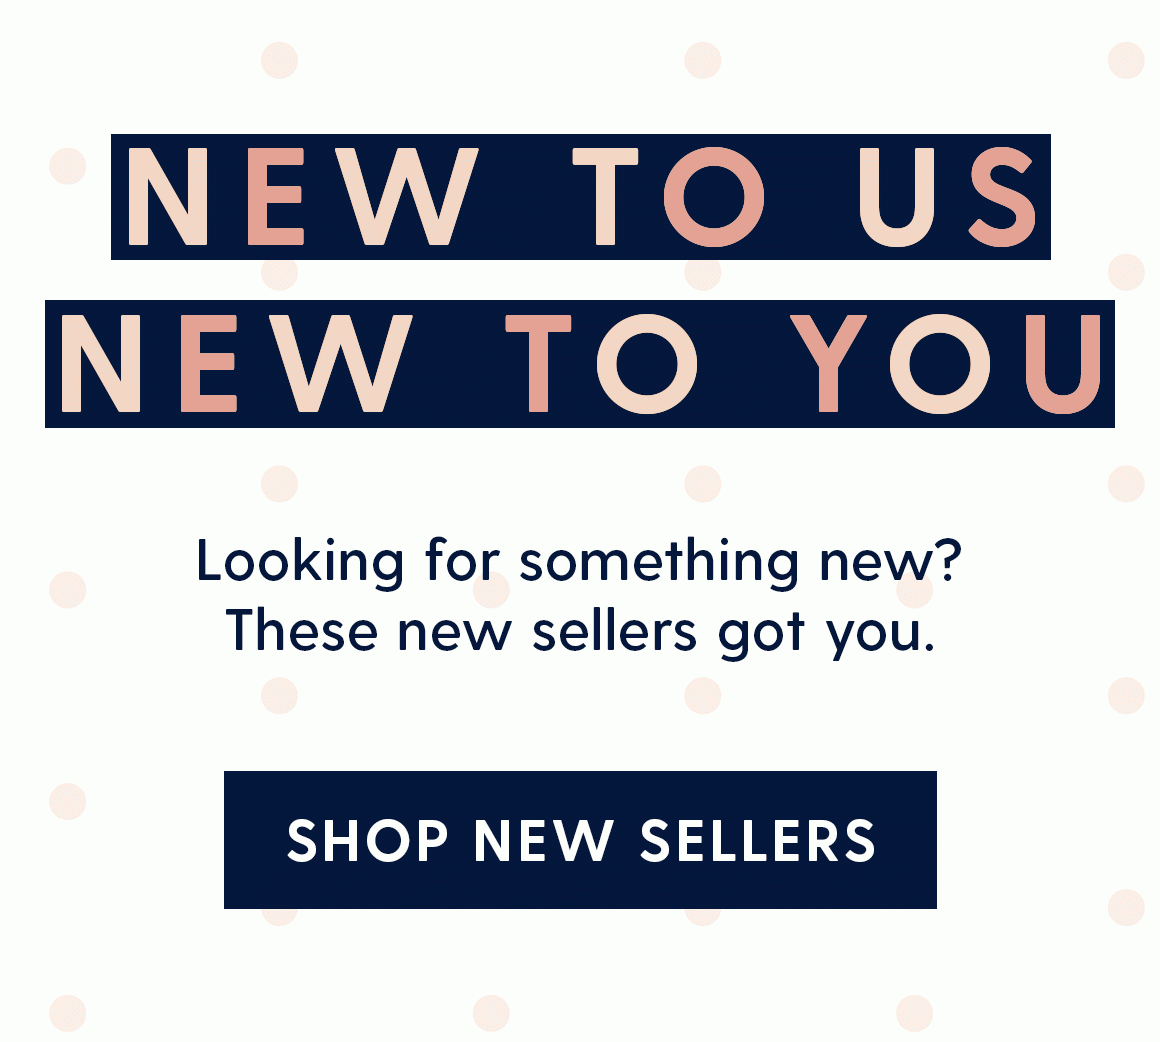 New to us. New to you. Looking for something new? These new sellers got you. Shop new sellers.